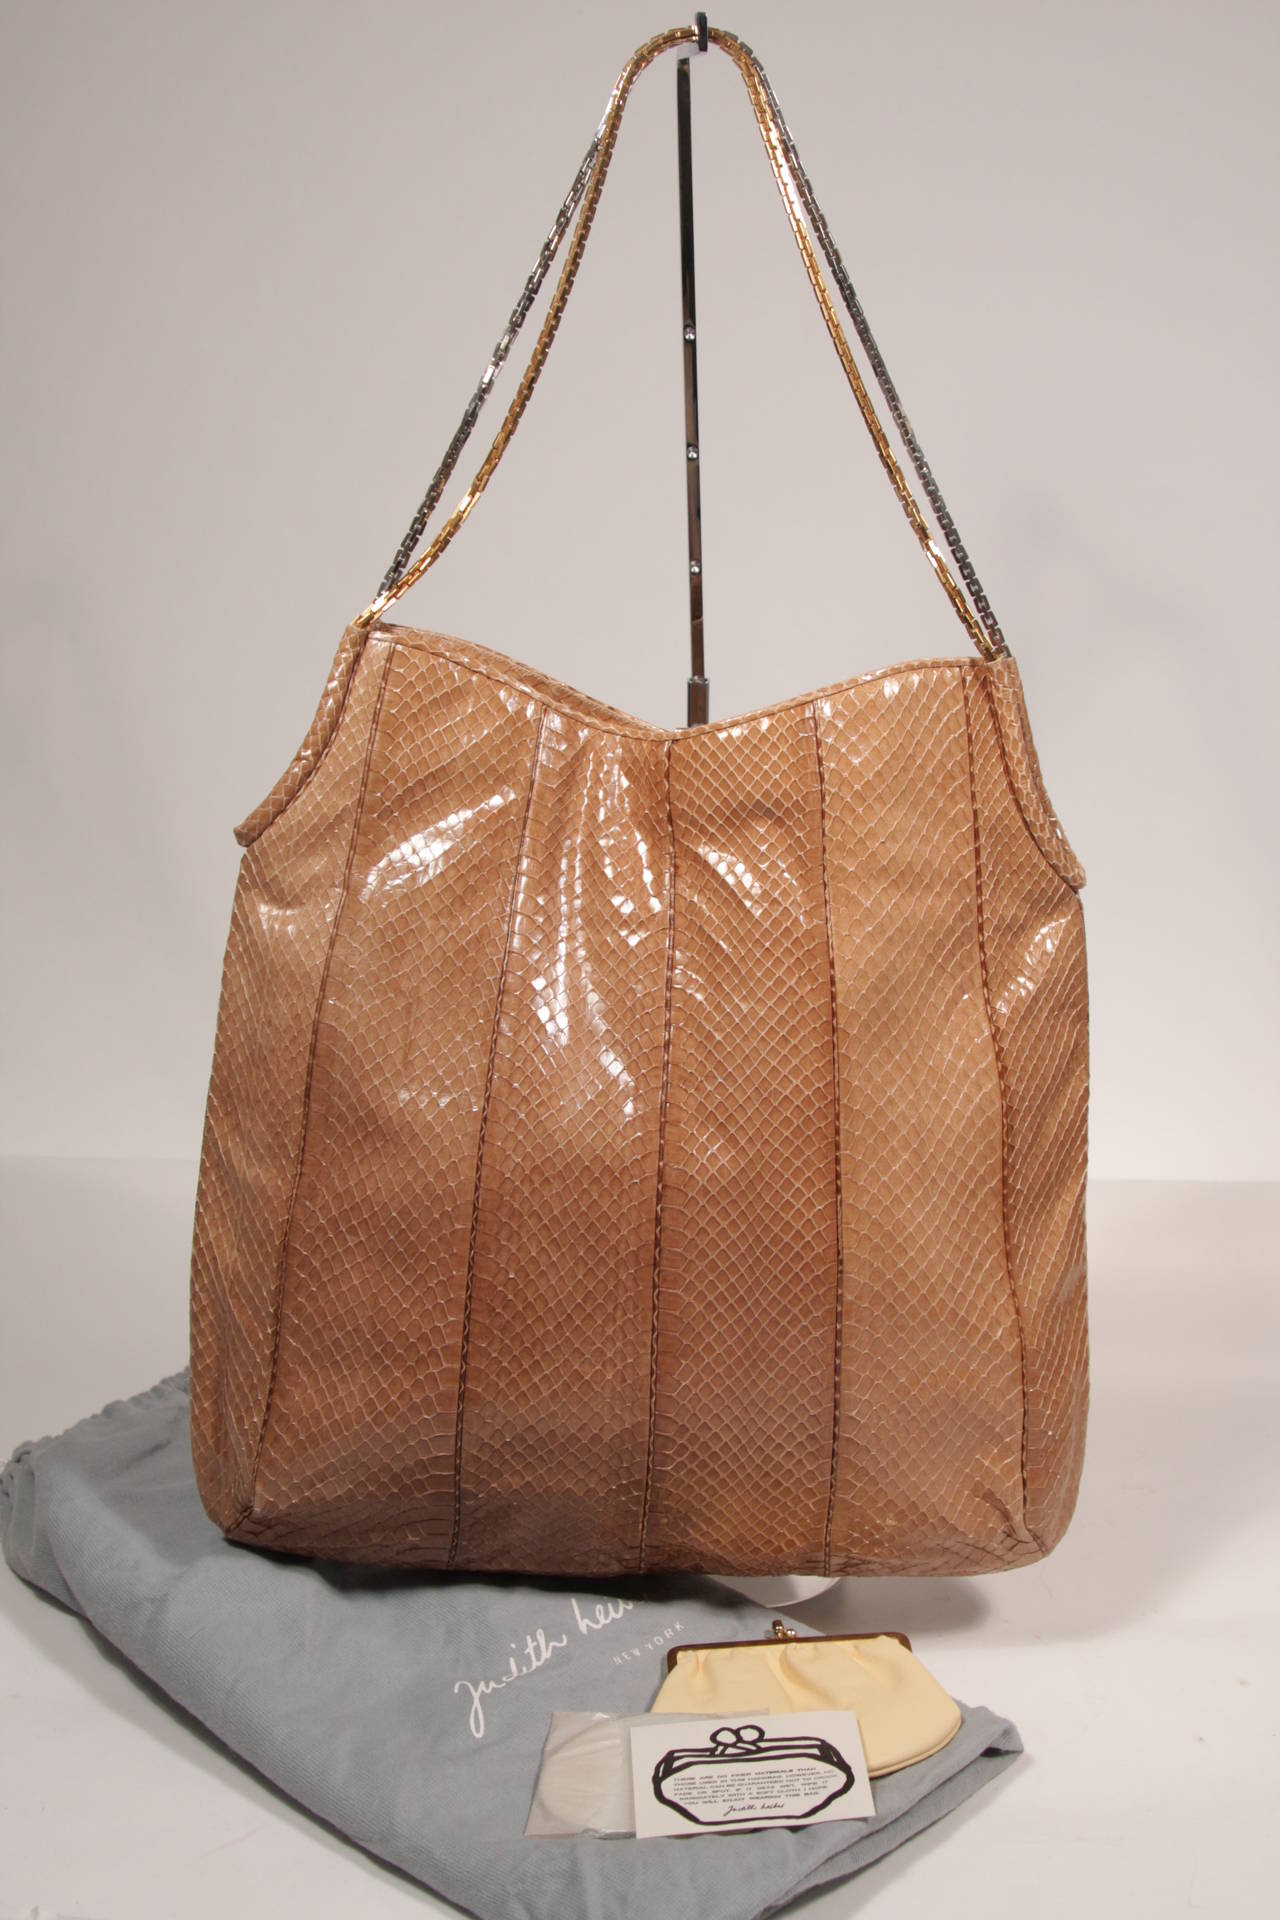 Judith Leiber Nude Snakeskin Hobo with Two Tone Chain NWT 3